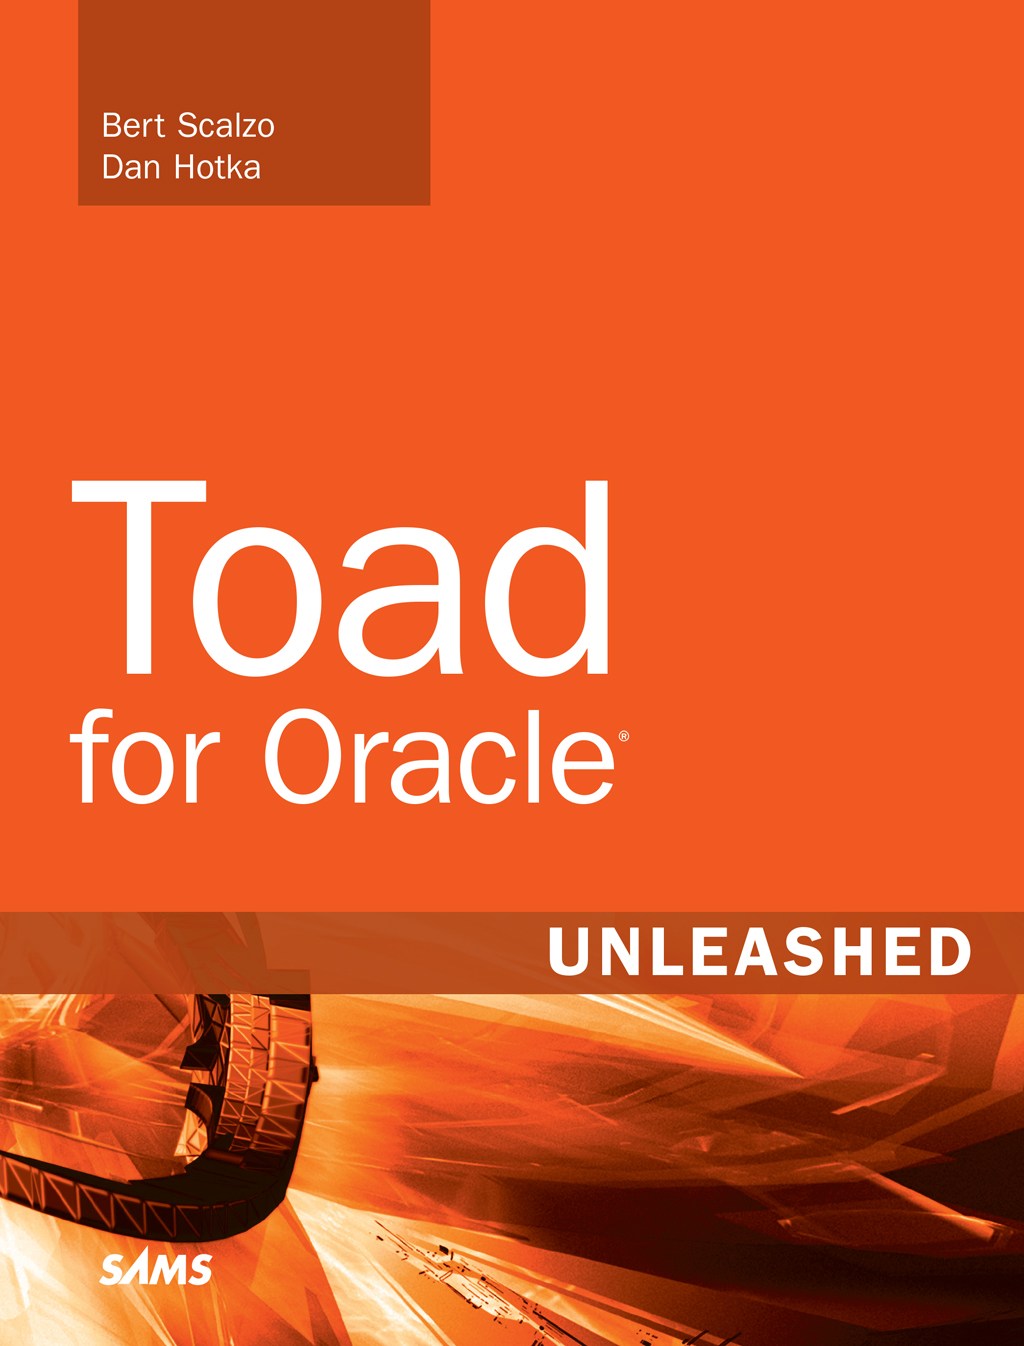 Toad for Oracle Unleashed